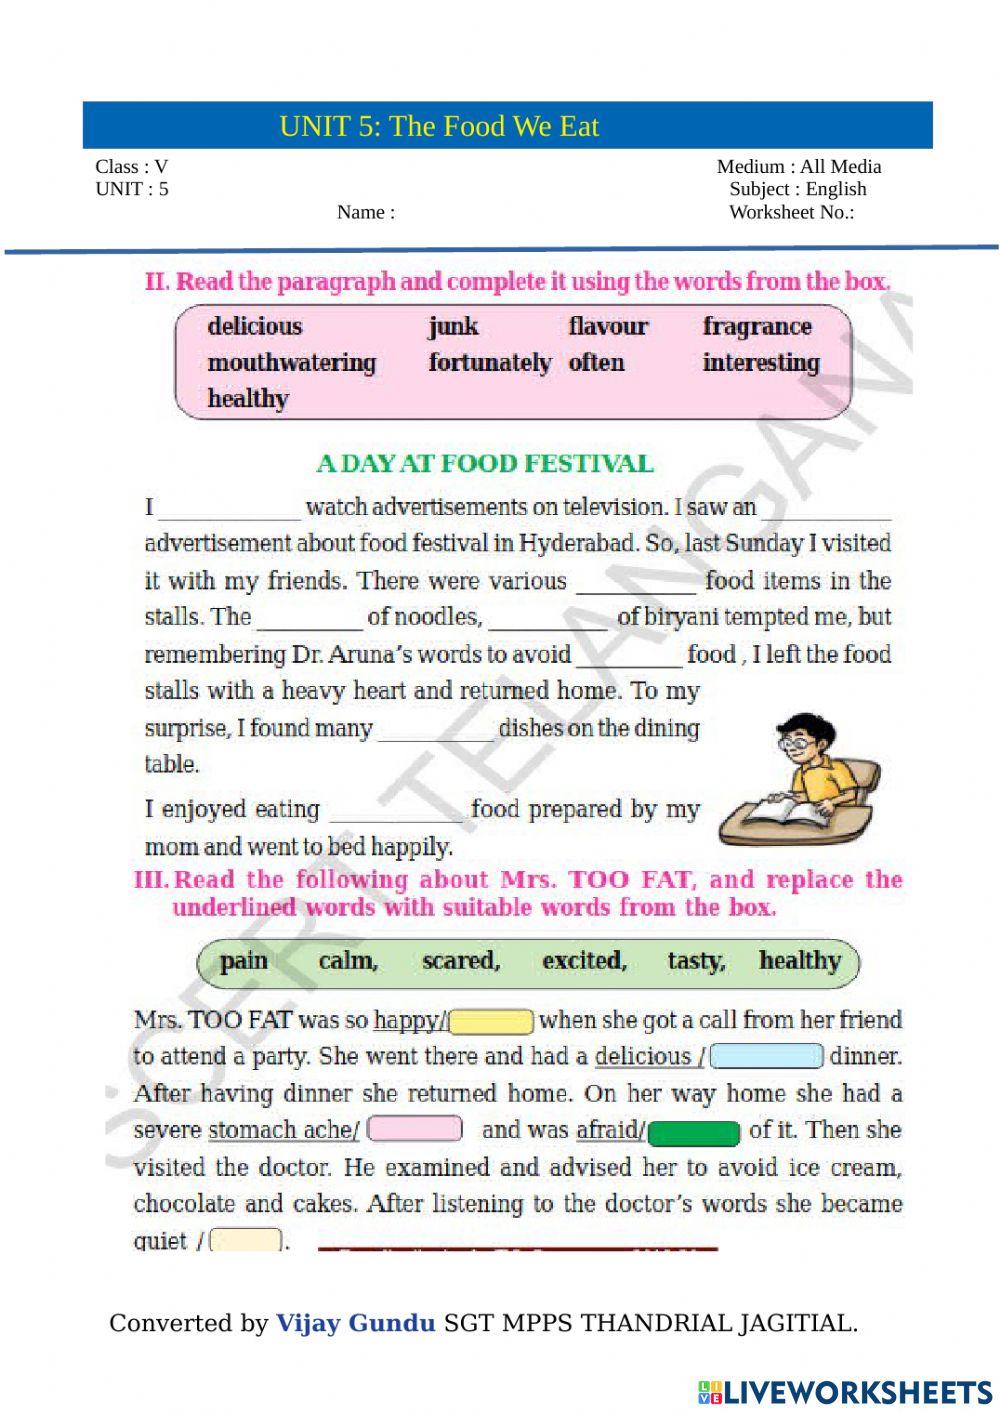 5th eng the food we eat fill in the balnks by Vijay Gundu